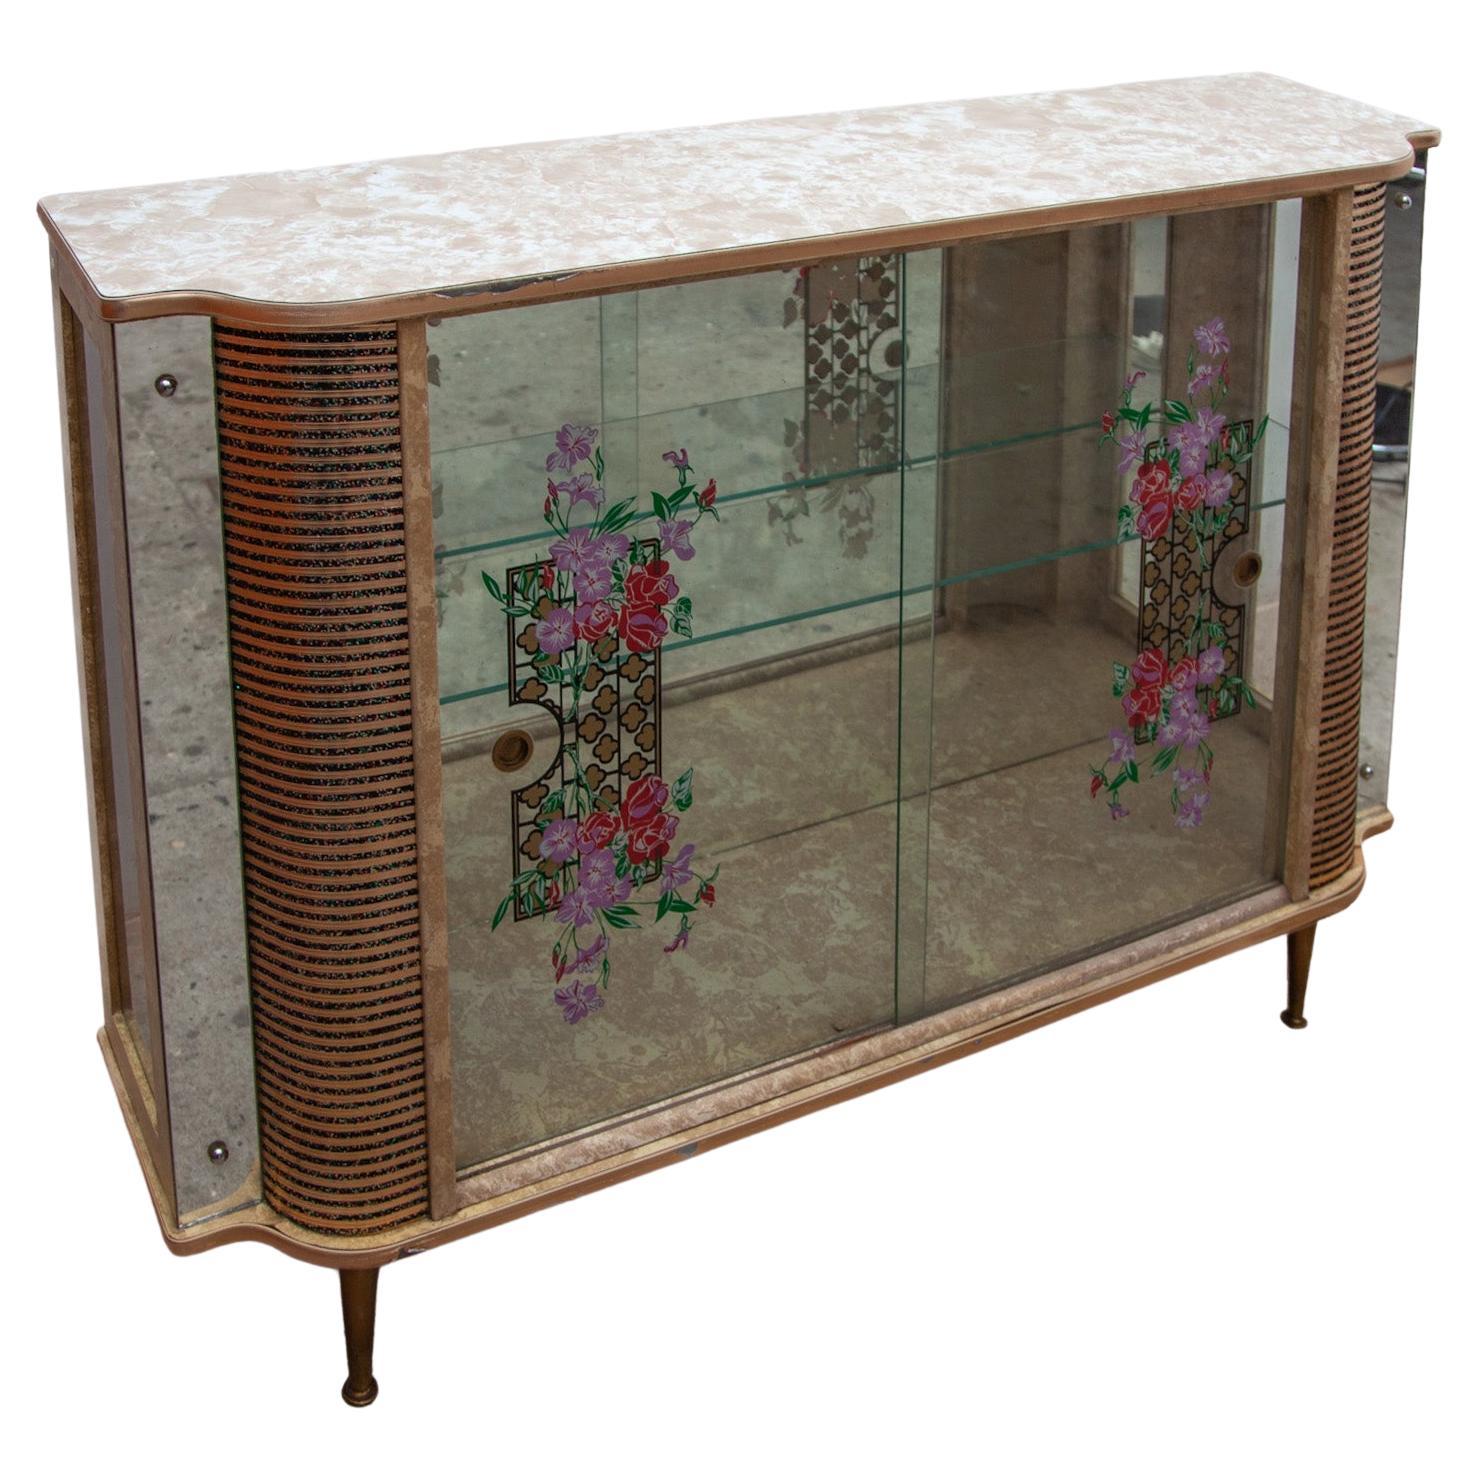  Vintage Glass Bar, Coctail, Display Cabinet with Shelves, 1950s